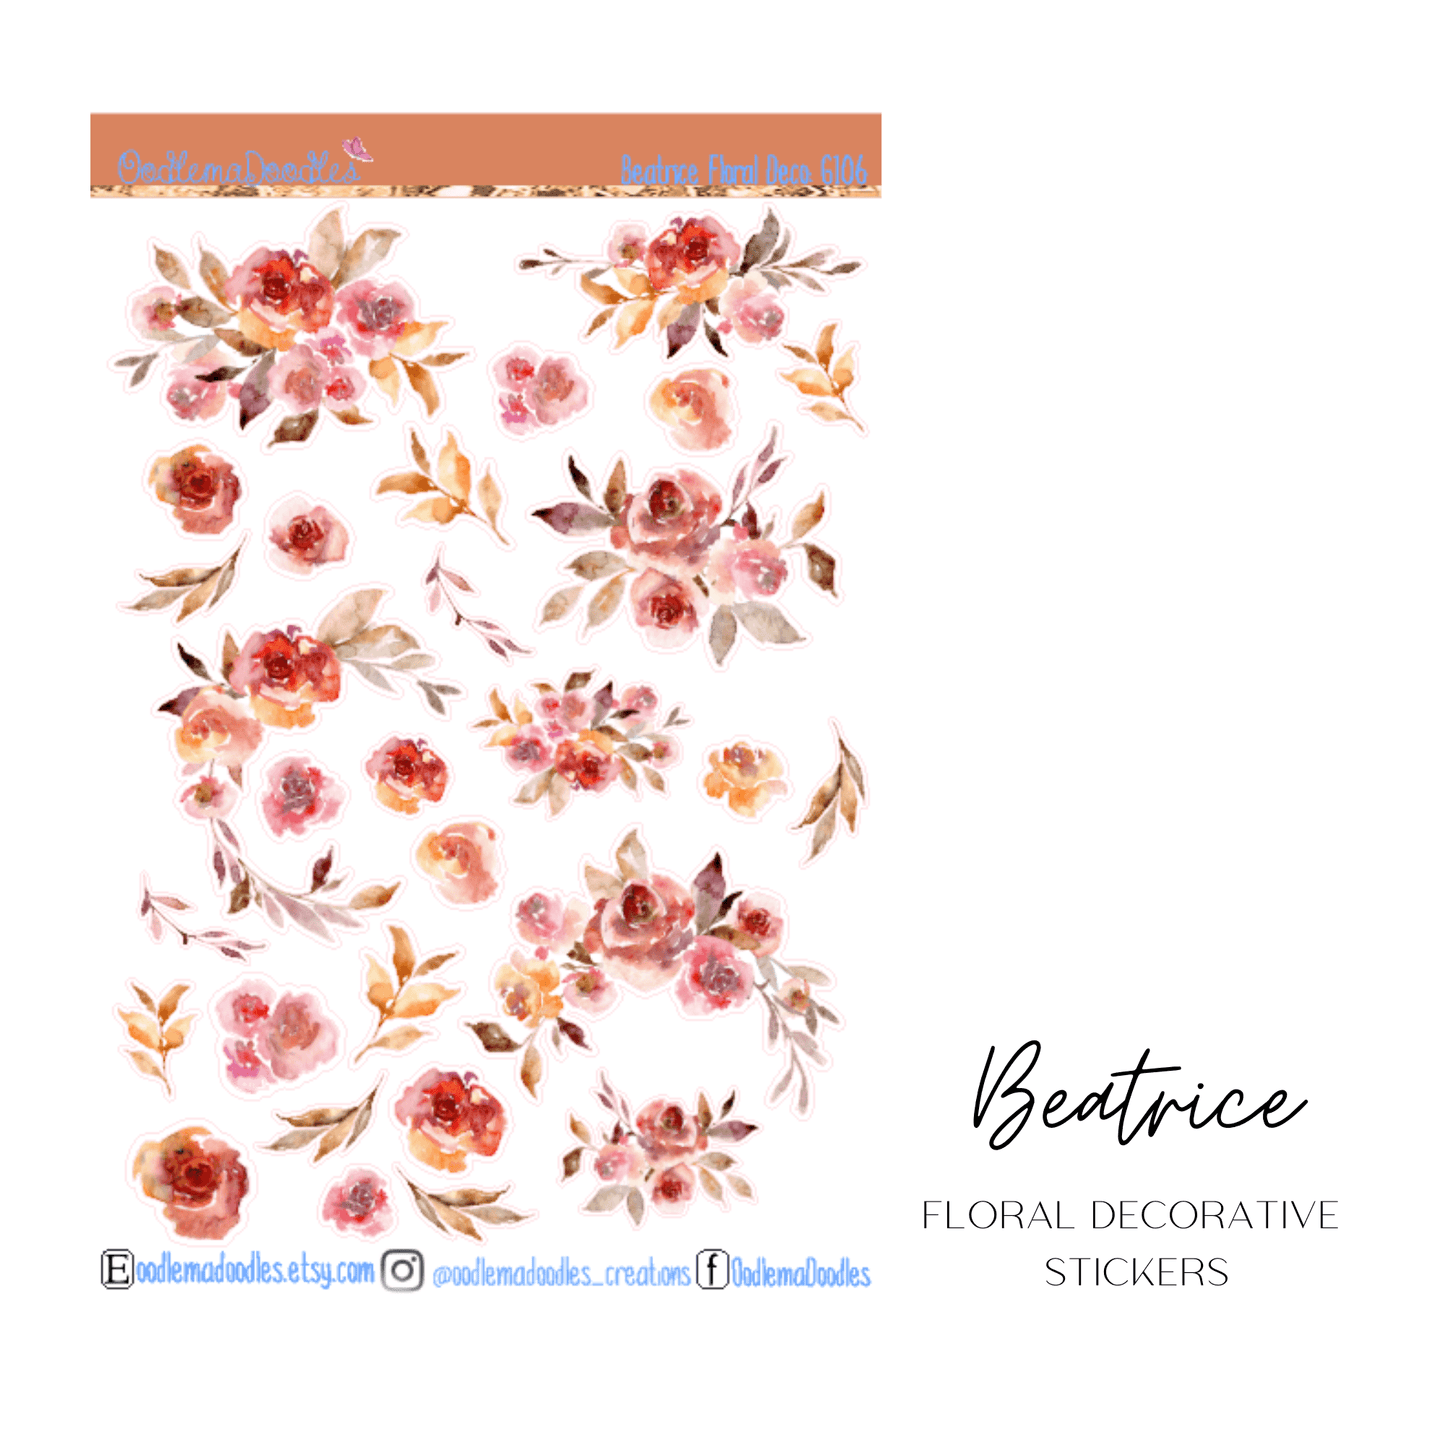 Beatrice Floral Decorative Stickers - oodlemadoodles